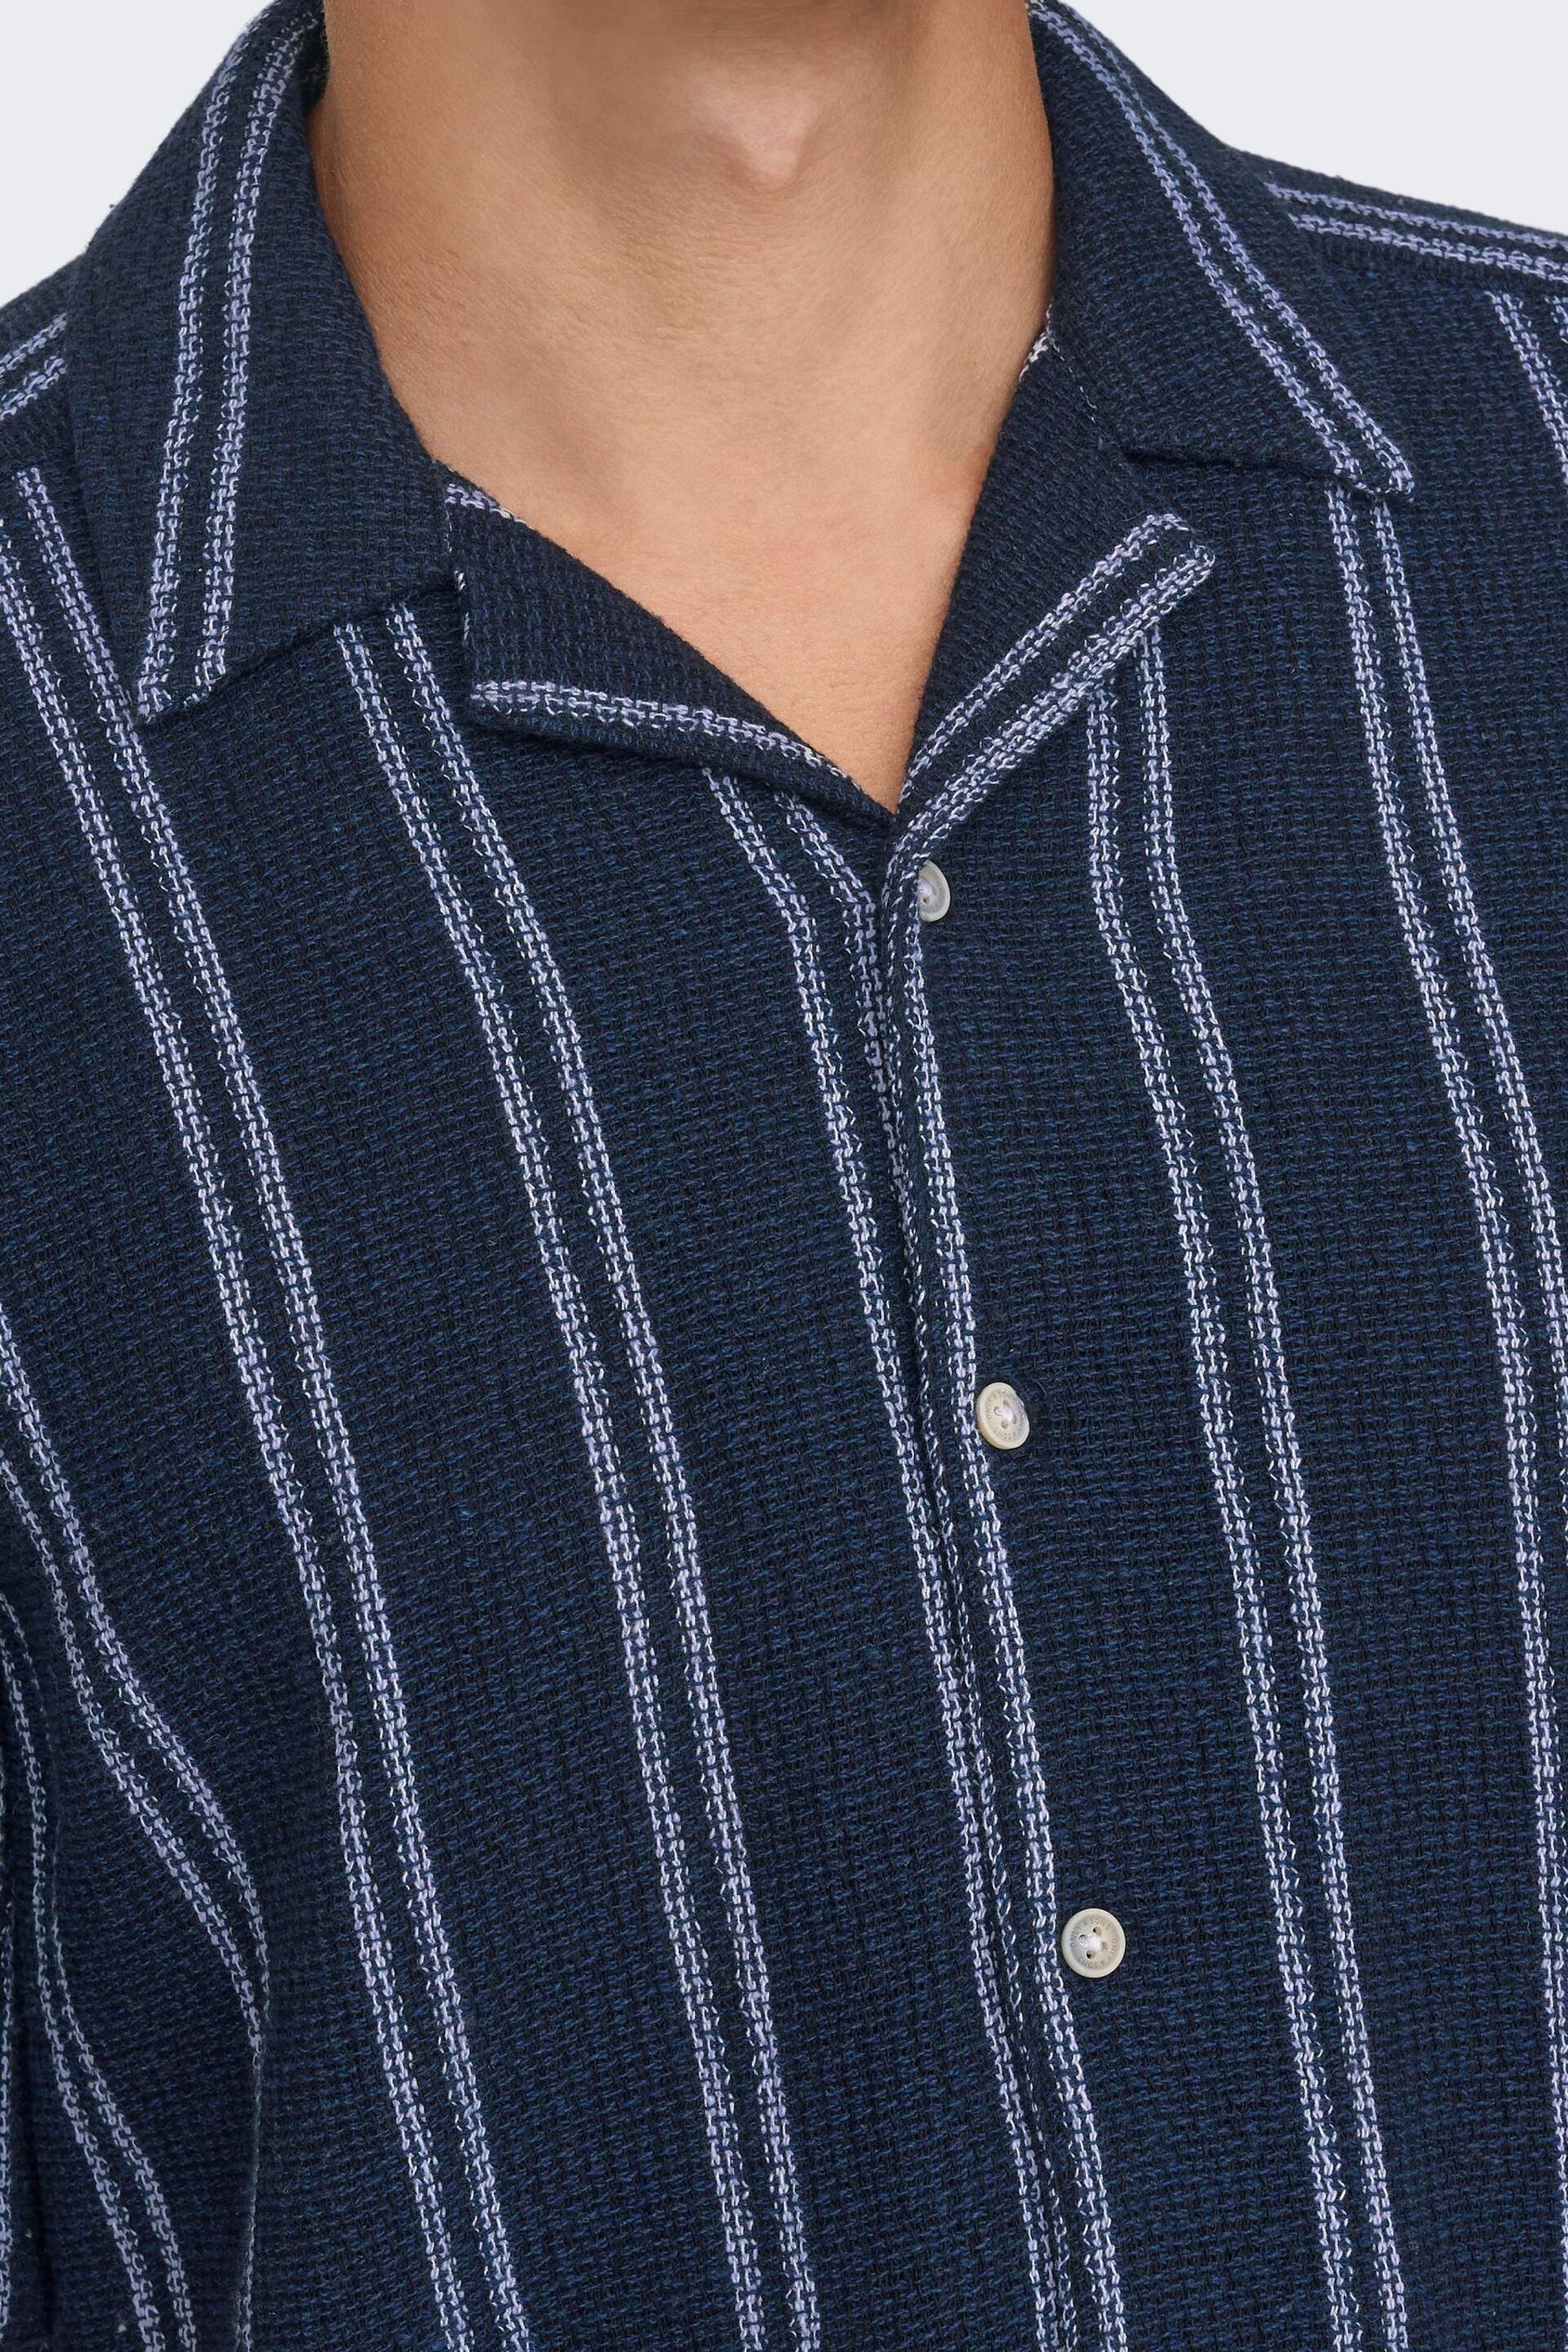 Only & Sons Navy Blue and White Woven Textured Short Sleeve Shirt - Image 4 of 5